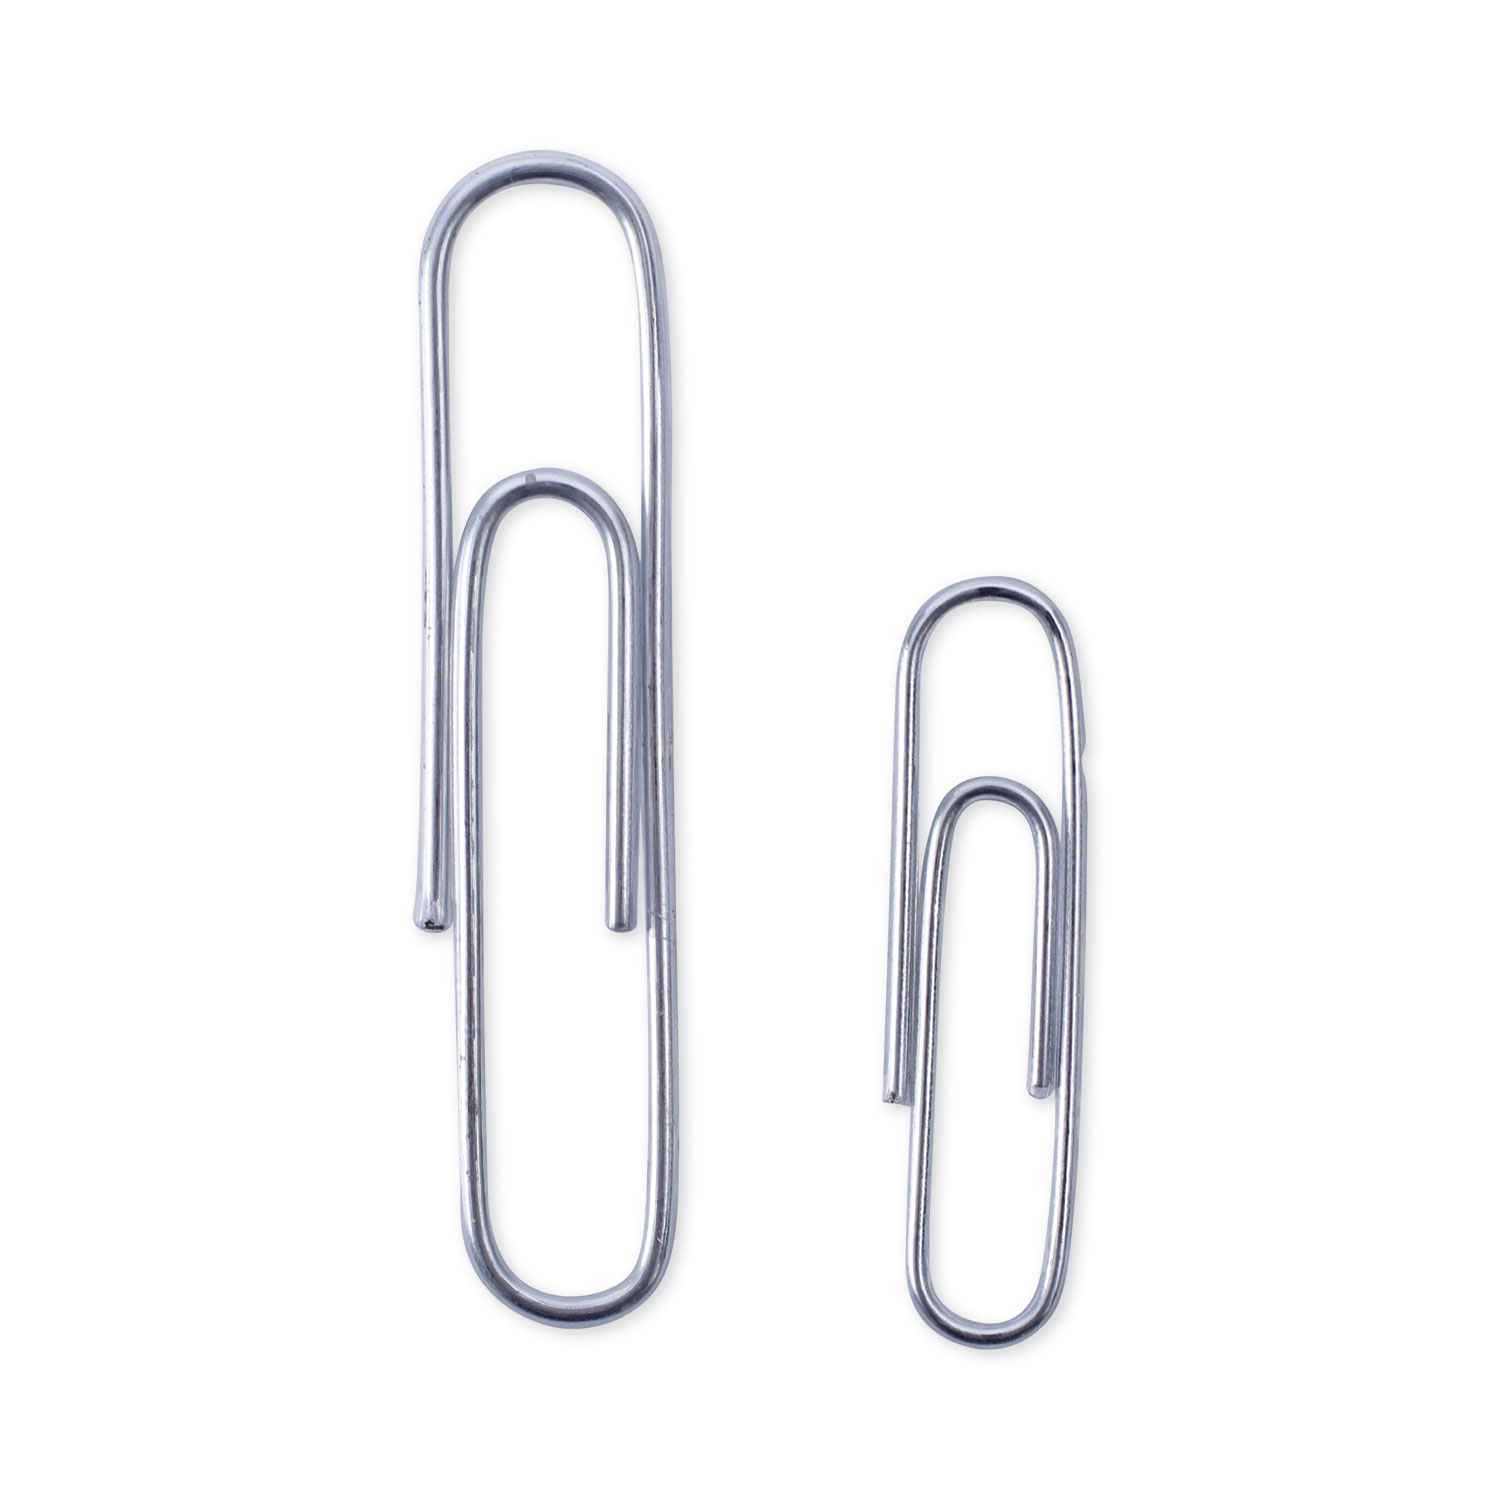 Universal Unv21001 Plastic-Coated Paper Clips - Assorted Sizes Silver (1000/Pack)